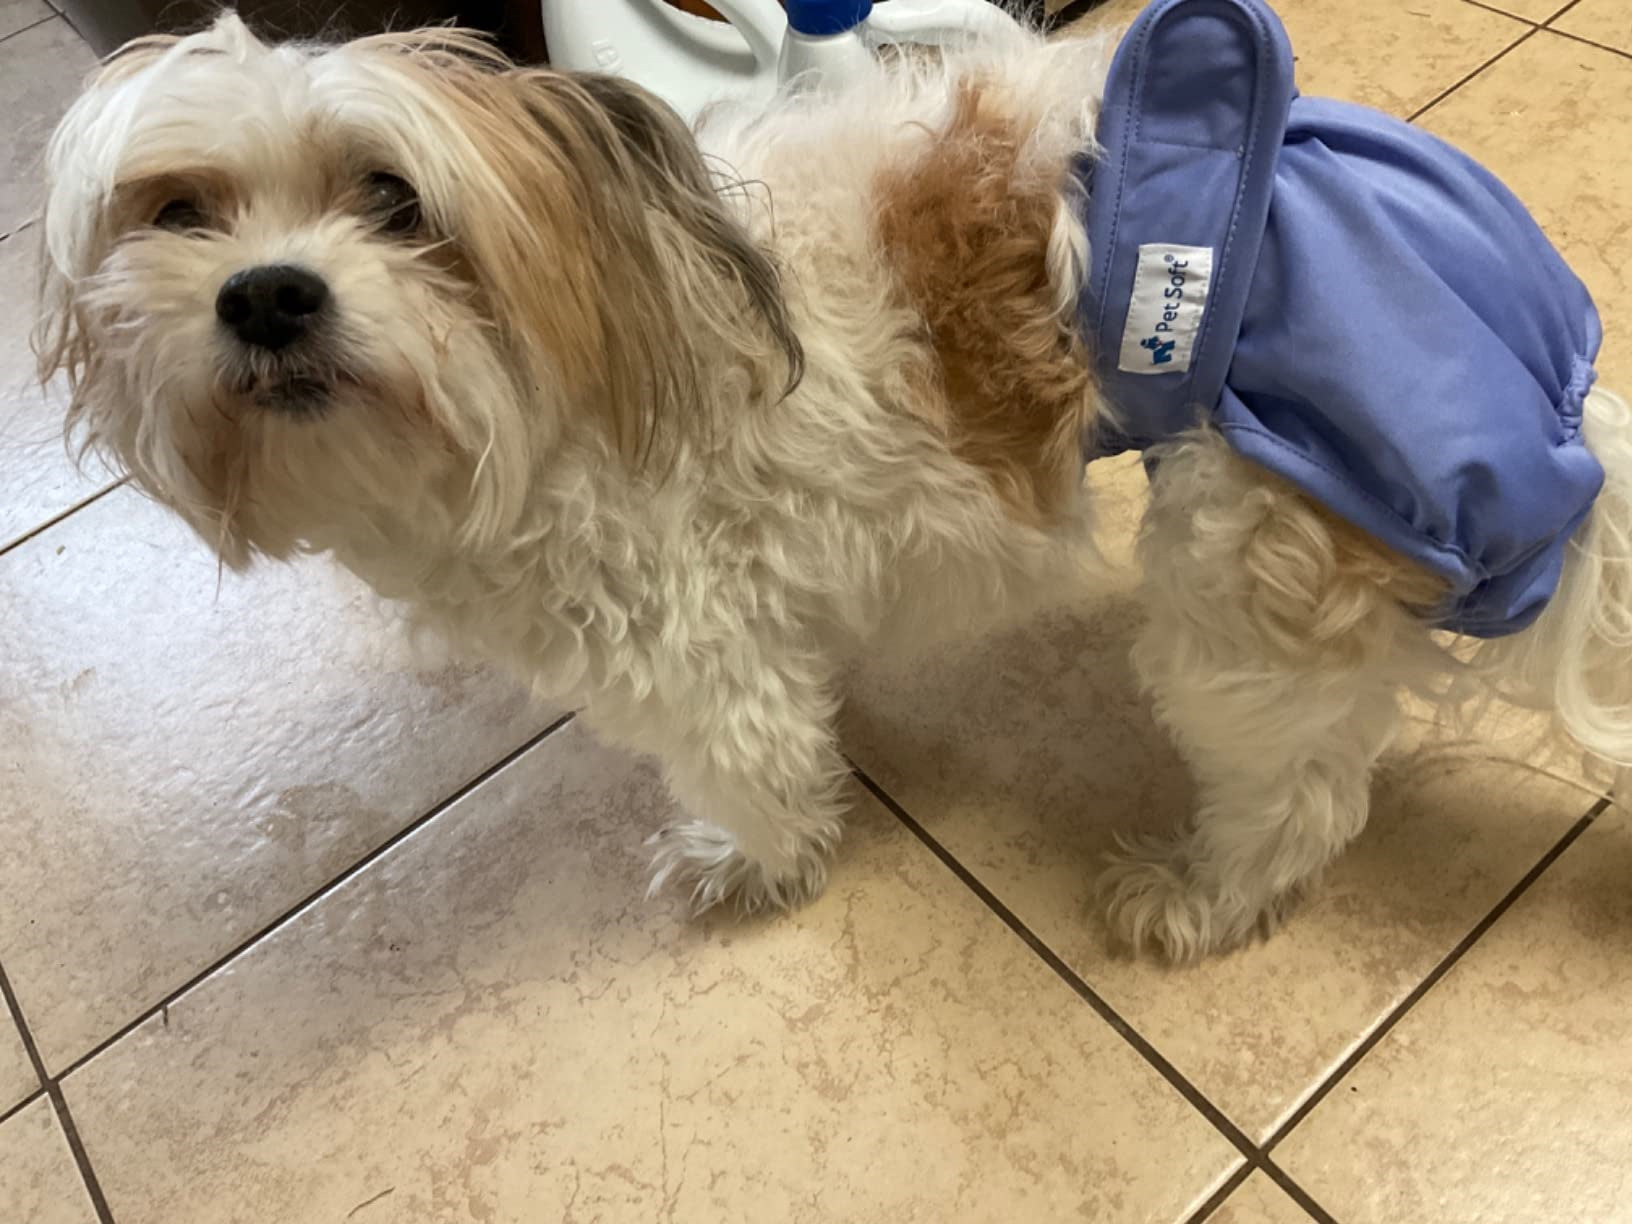 Dogs wear washable diapers to prevent incontinence